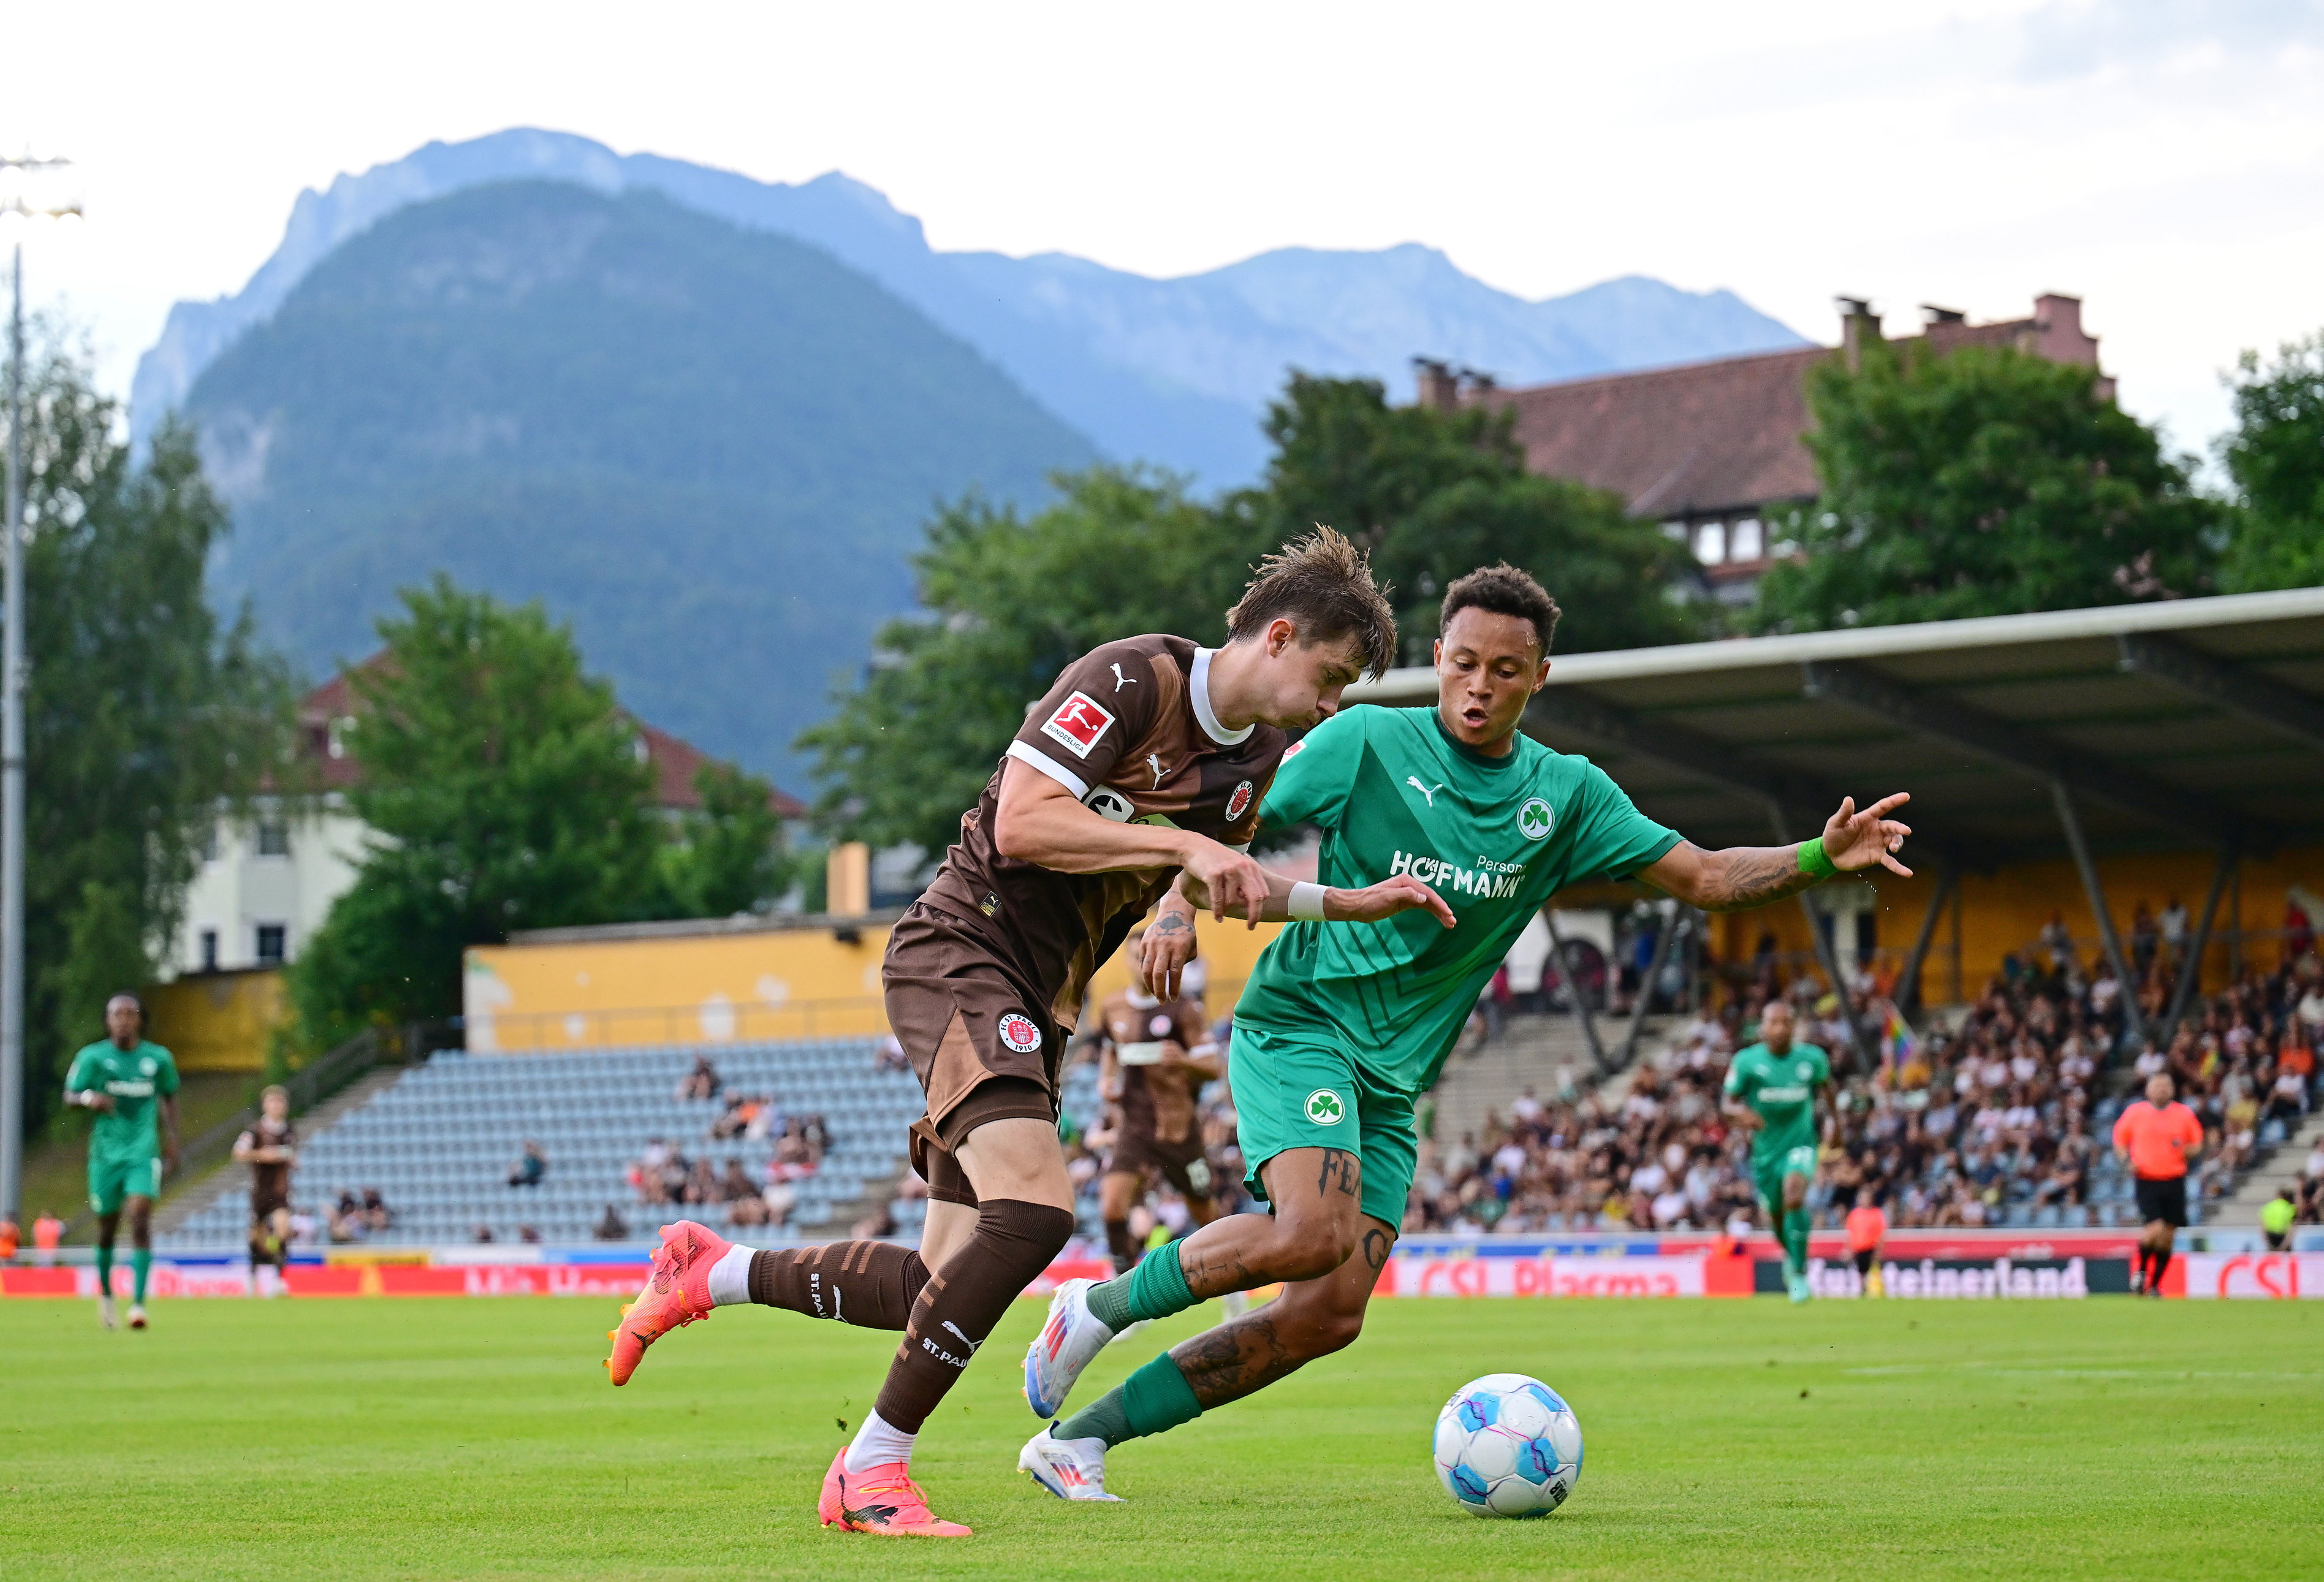 Scott Banks under challenges from Fürth's Roberto Massimo, who opened the scoring for the second-division side after 29 minutes.